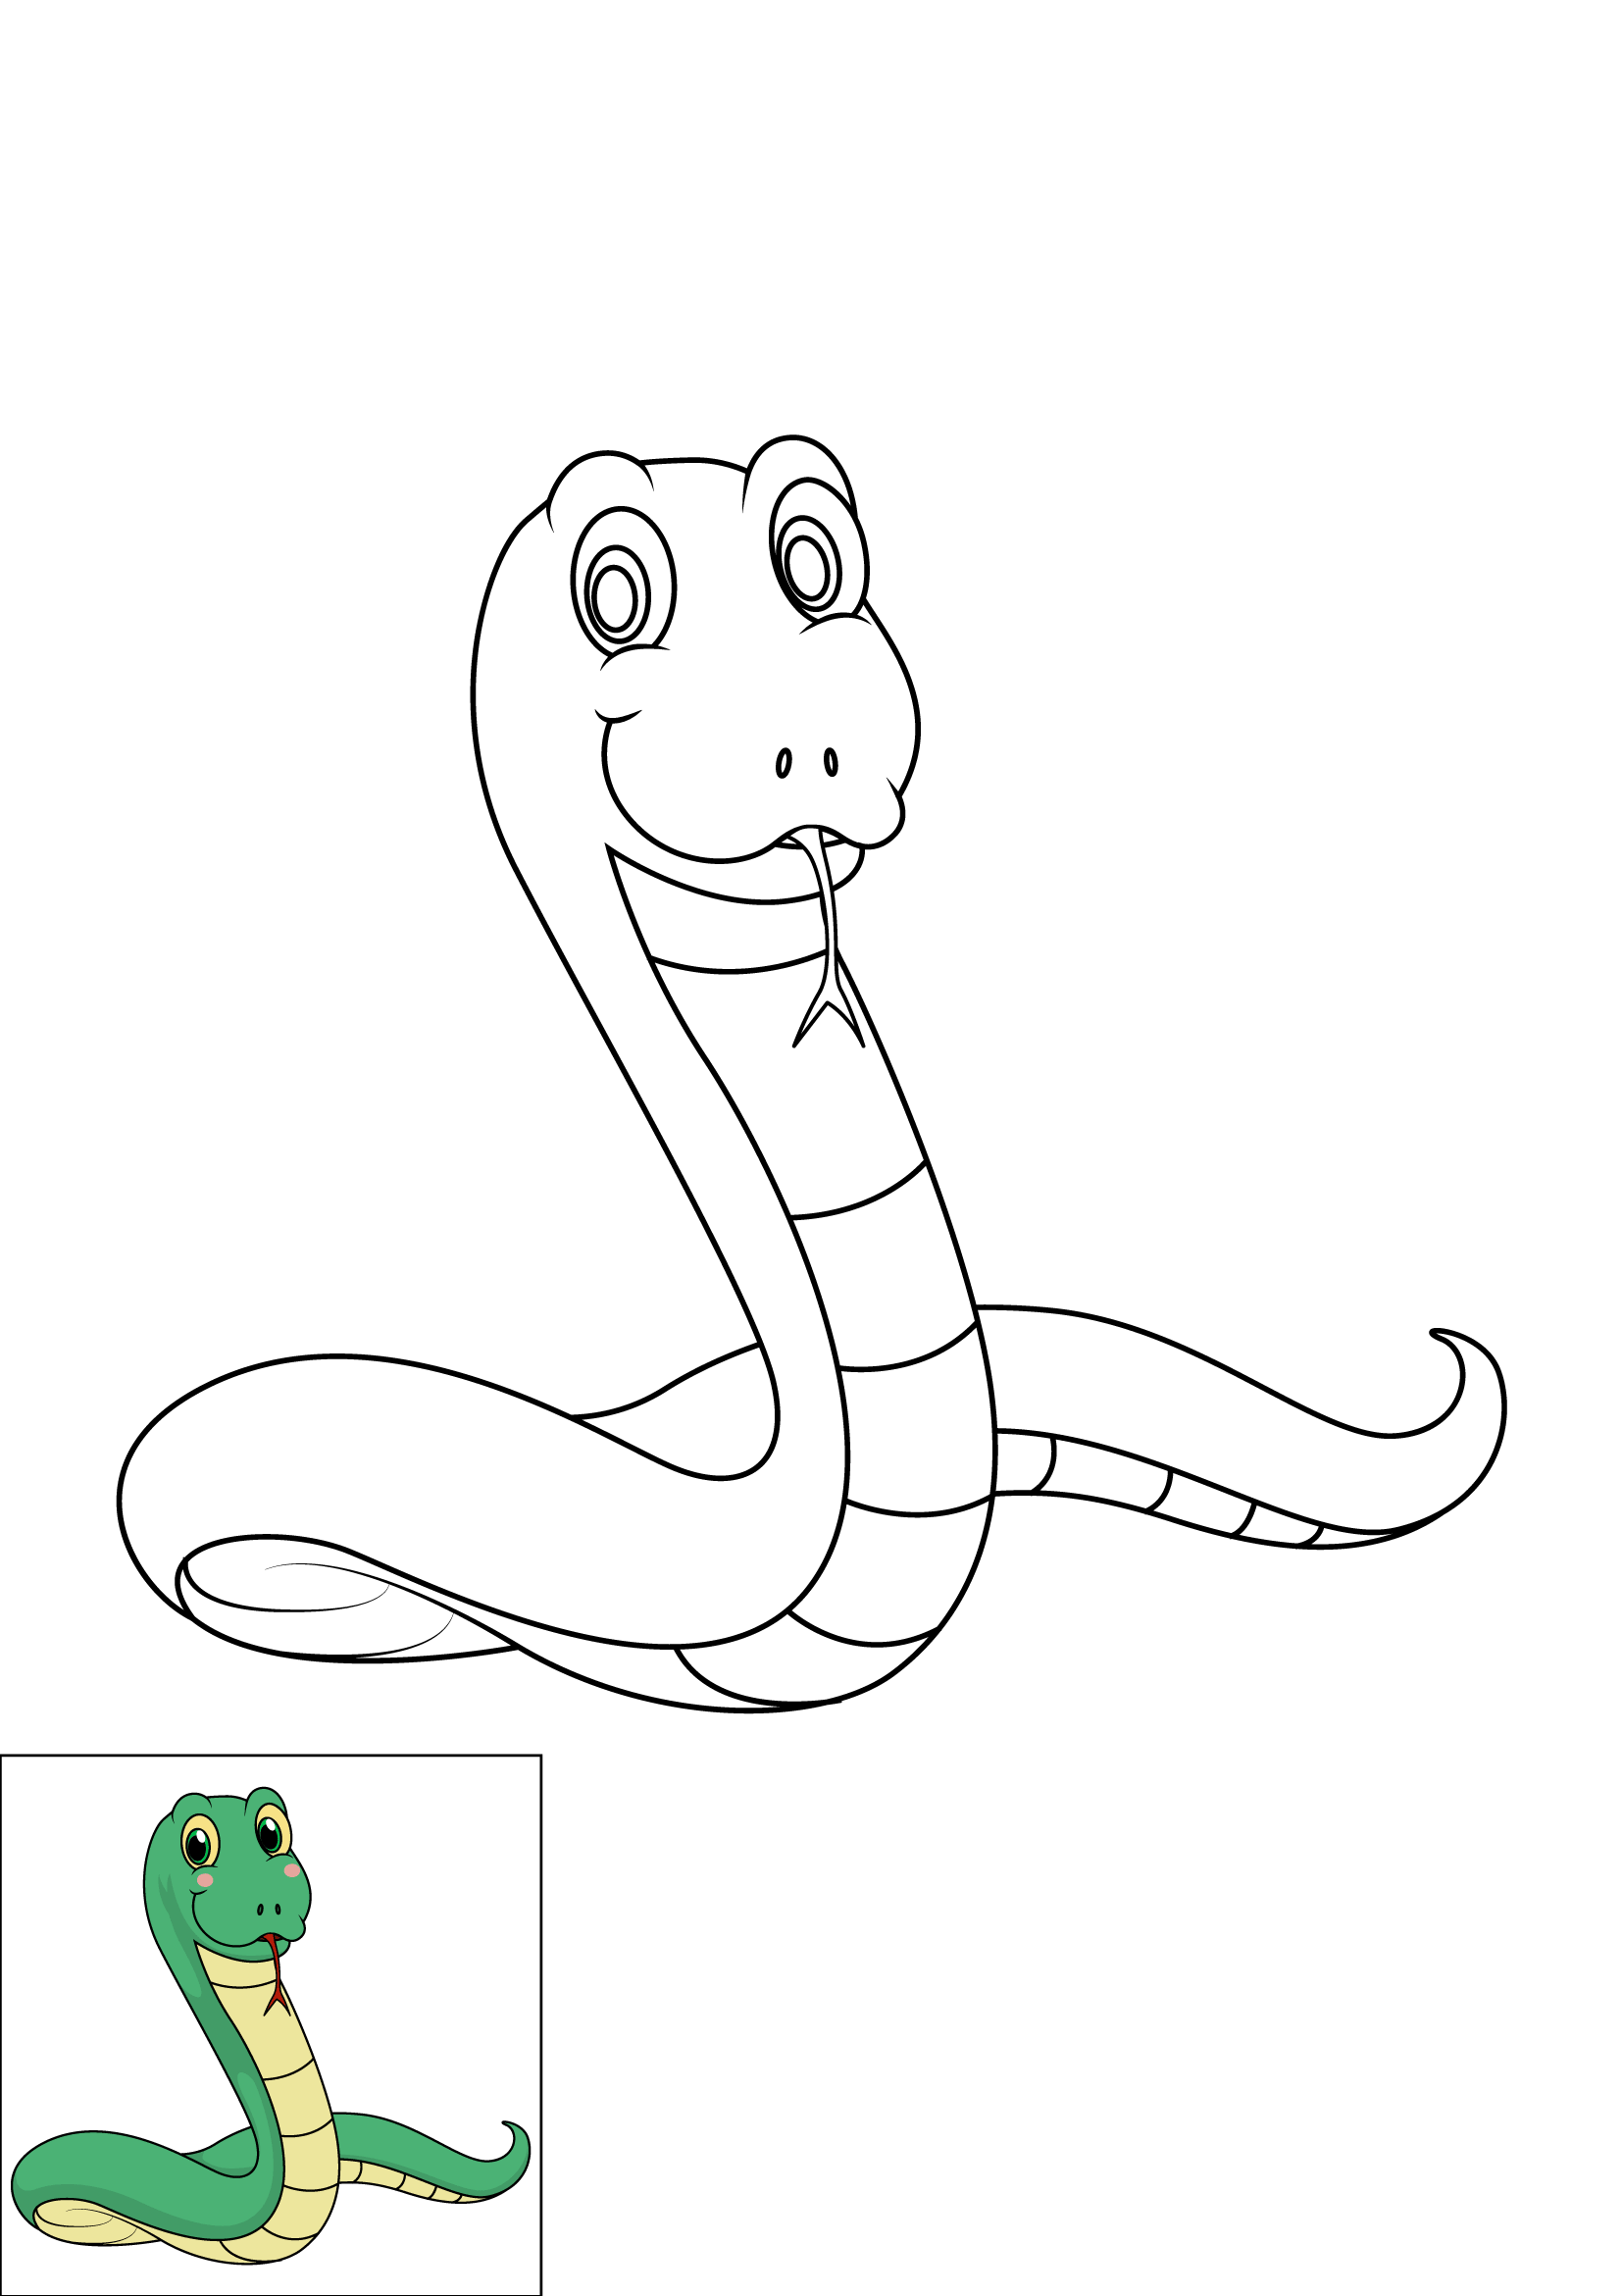 How to Draw A Cute Snake Step by Step Printable Color